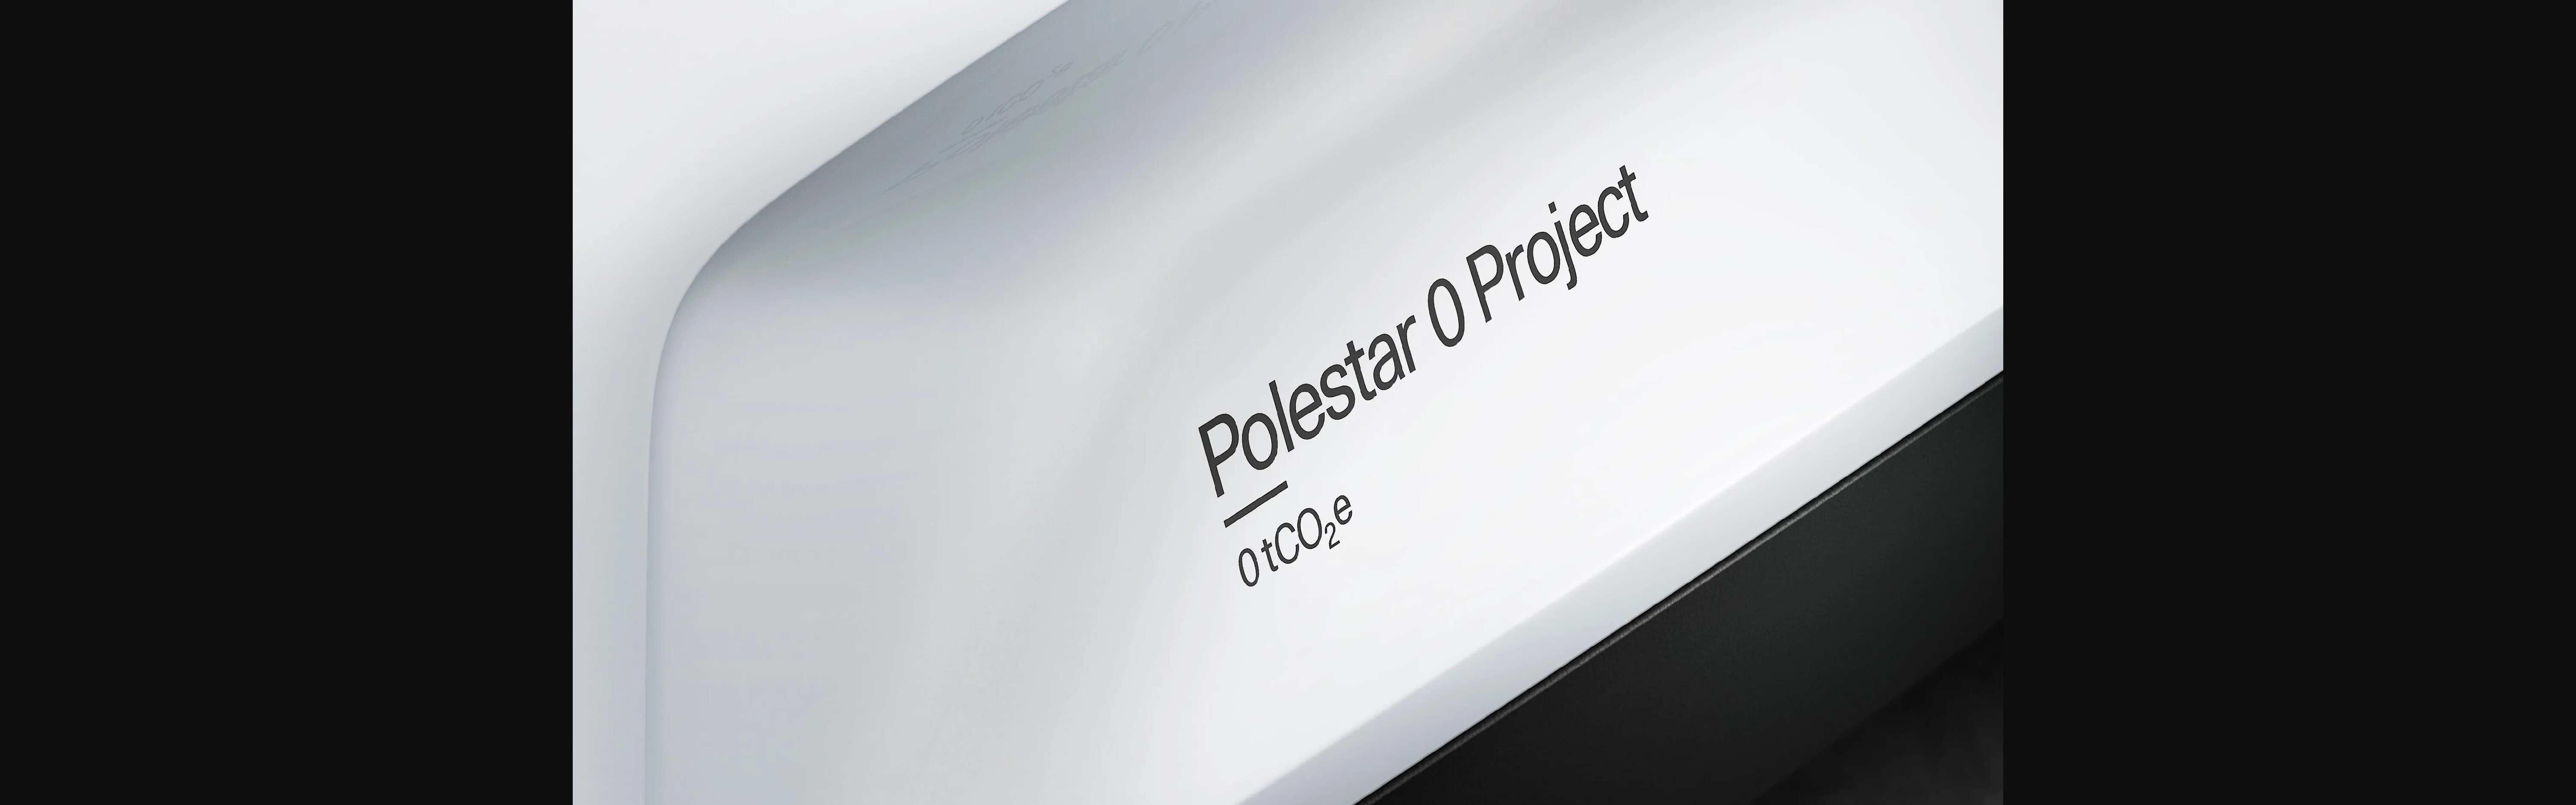 Nokian Tyres joins the Polestar 0 project to create the first climate-neutral car